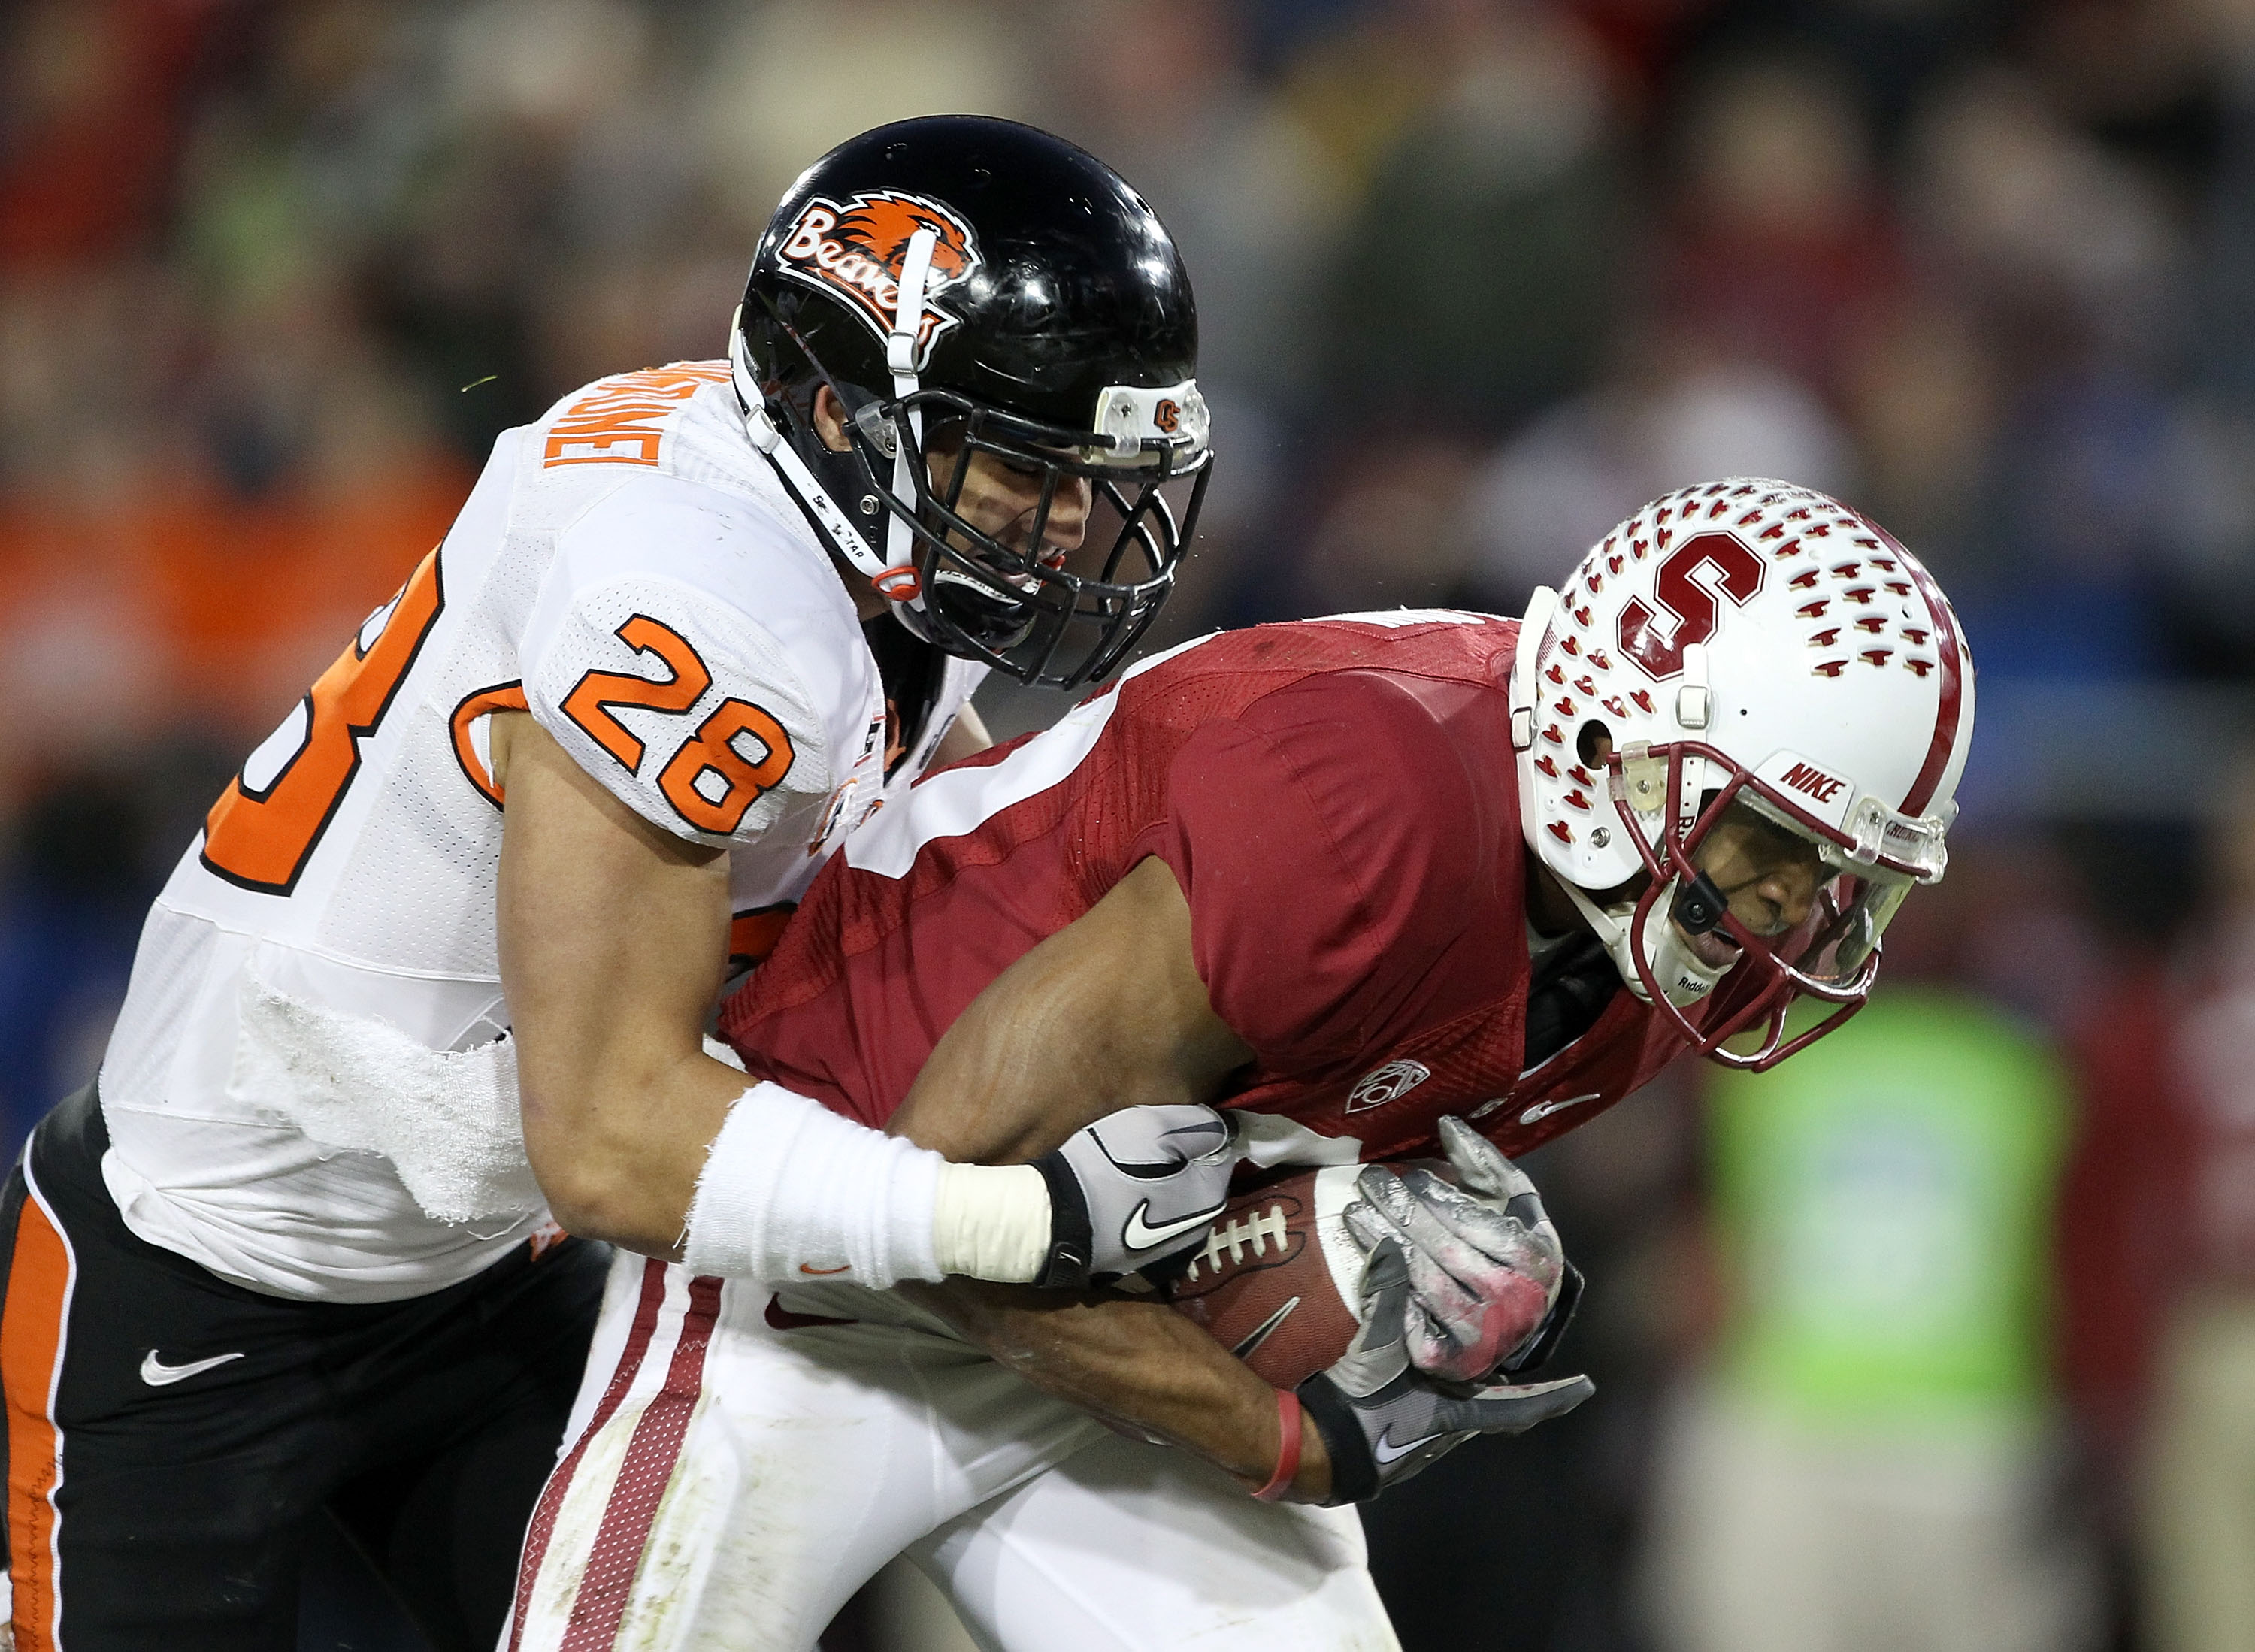 PALO ALTO, CA - NOVEMBER 27:  Doug Baldwin #89 of the Stanford Cardinal goes in for a 42-yard touchdown reception while Suaesi Tuimanunei #28 of the Oregon State Beavers tries to tackled him at Stanford Stadium on November 27, 2010 in Palo Alto, Californi